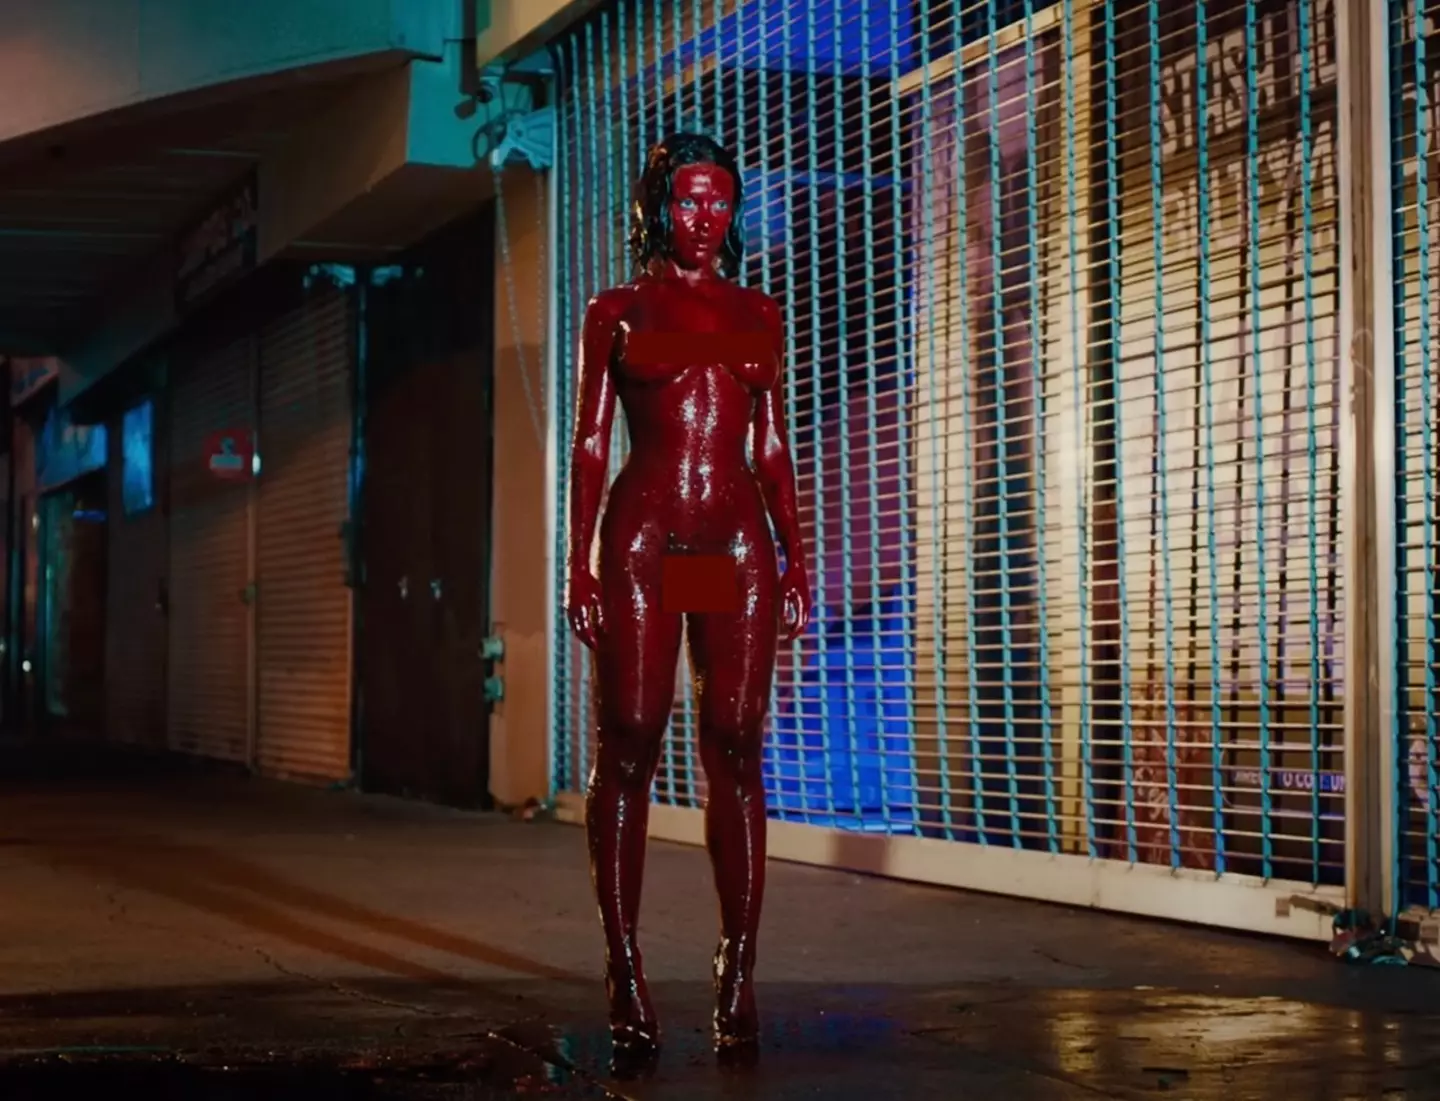 Doja Cat's bloody music video 'Attention' is certainly getting a lot of attention.